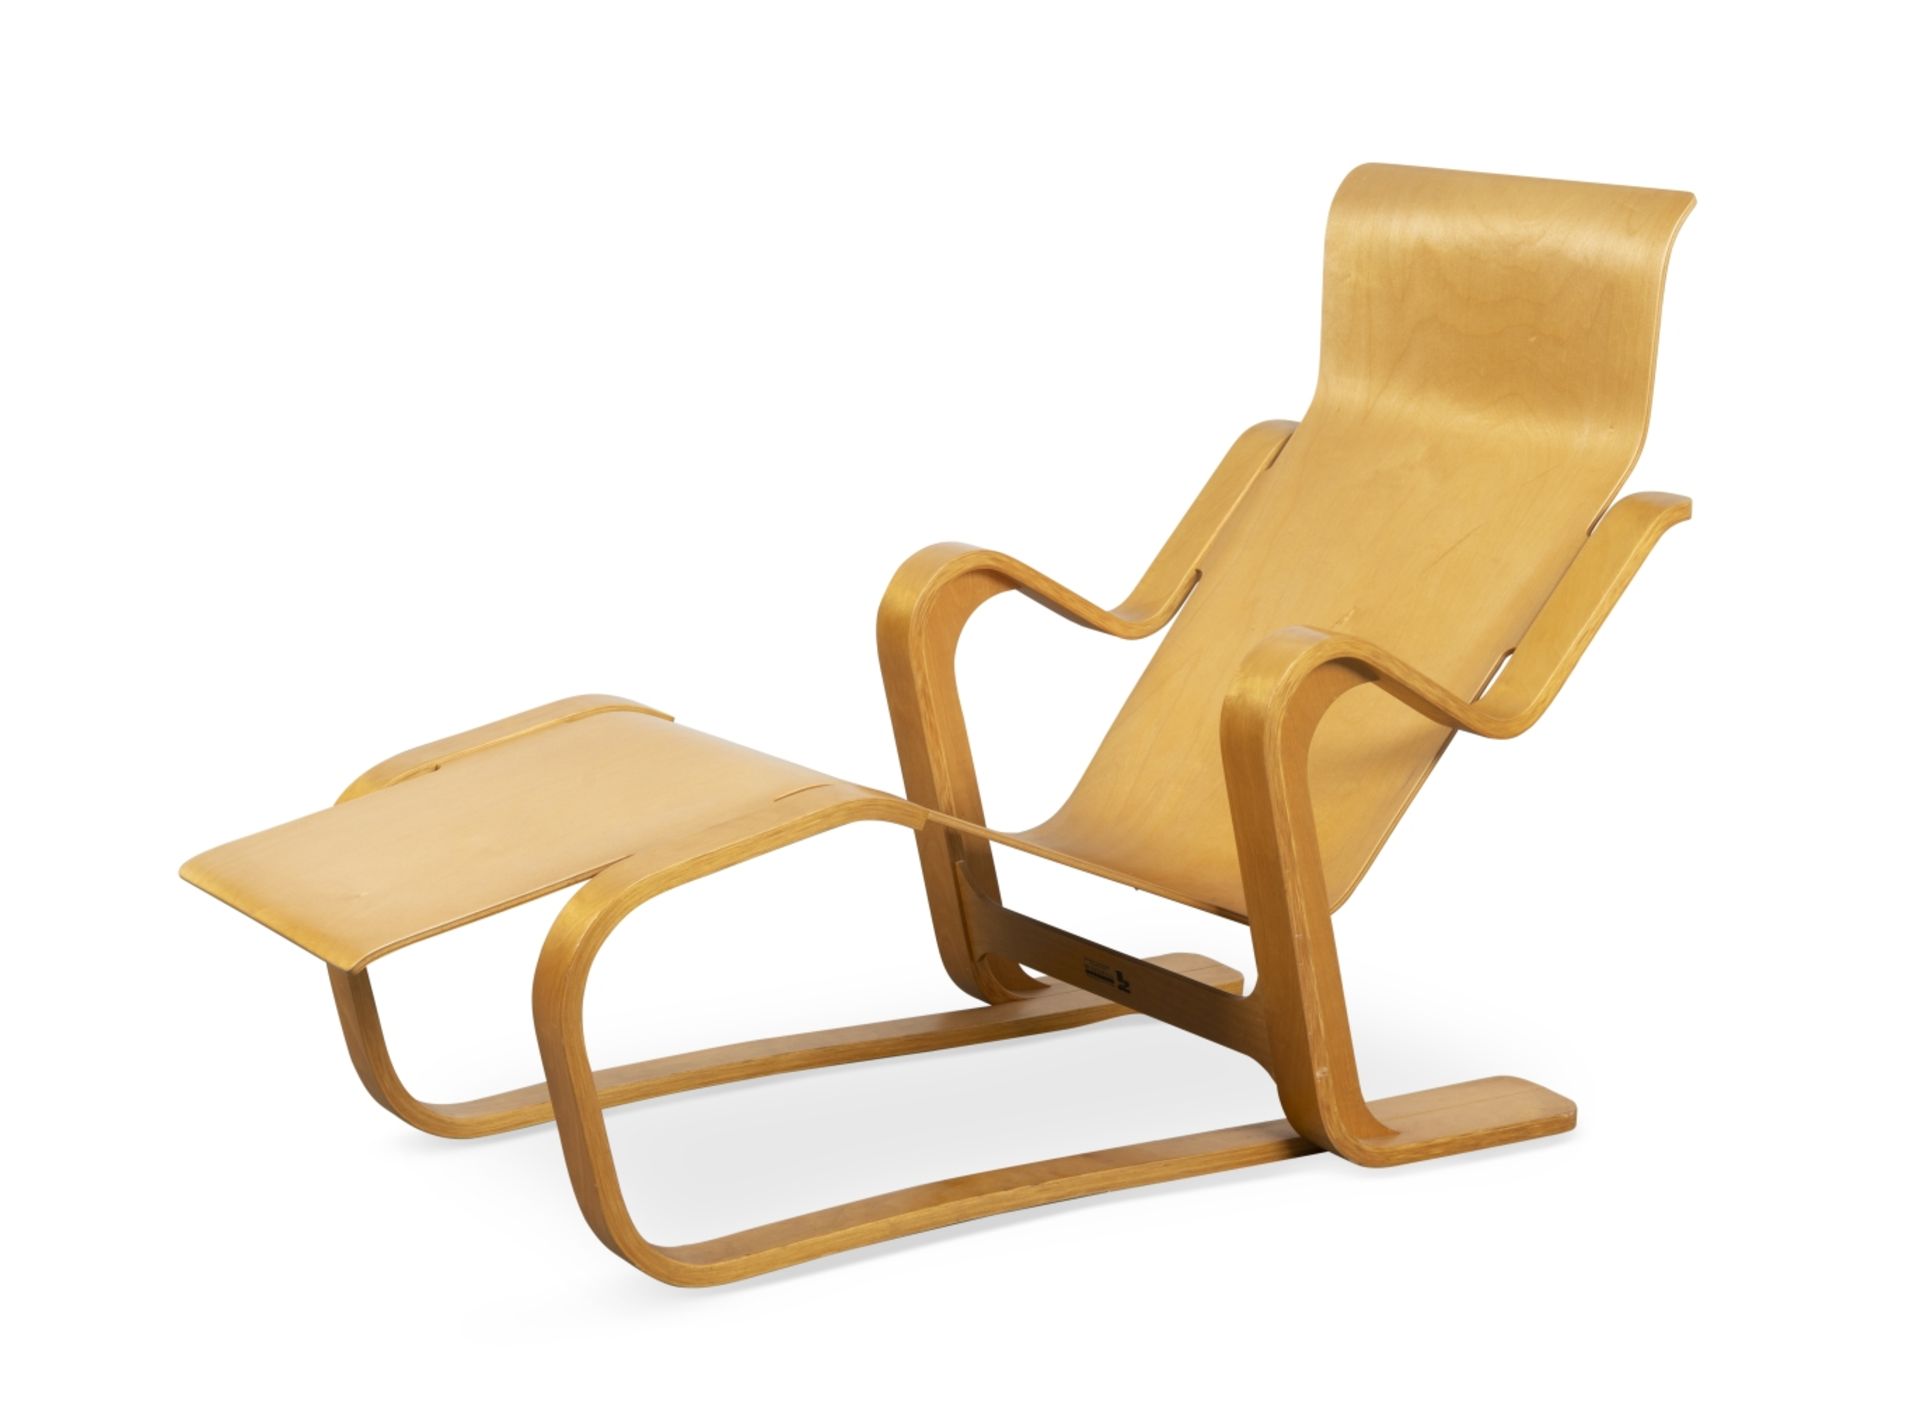 A bent laminate 'Long Chair' after the design by Marcel Breuer for Isokon Made by Windmill Furniture